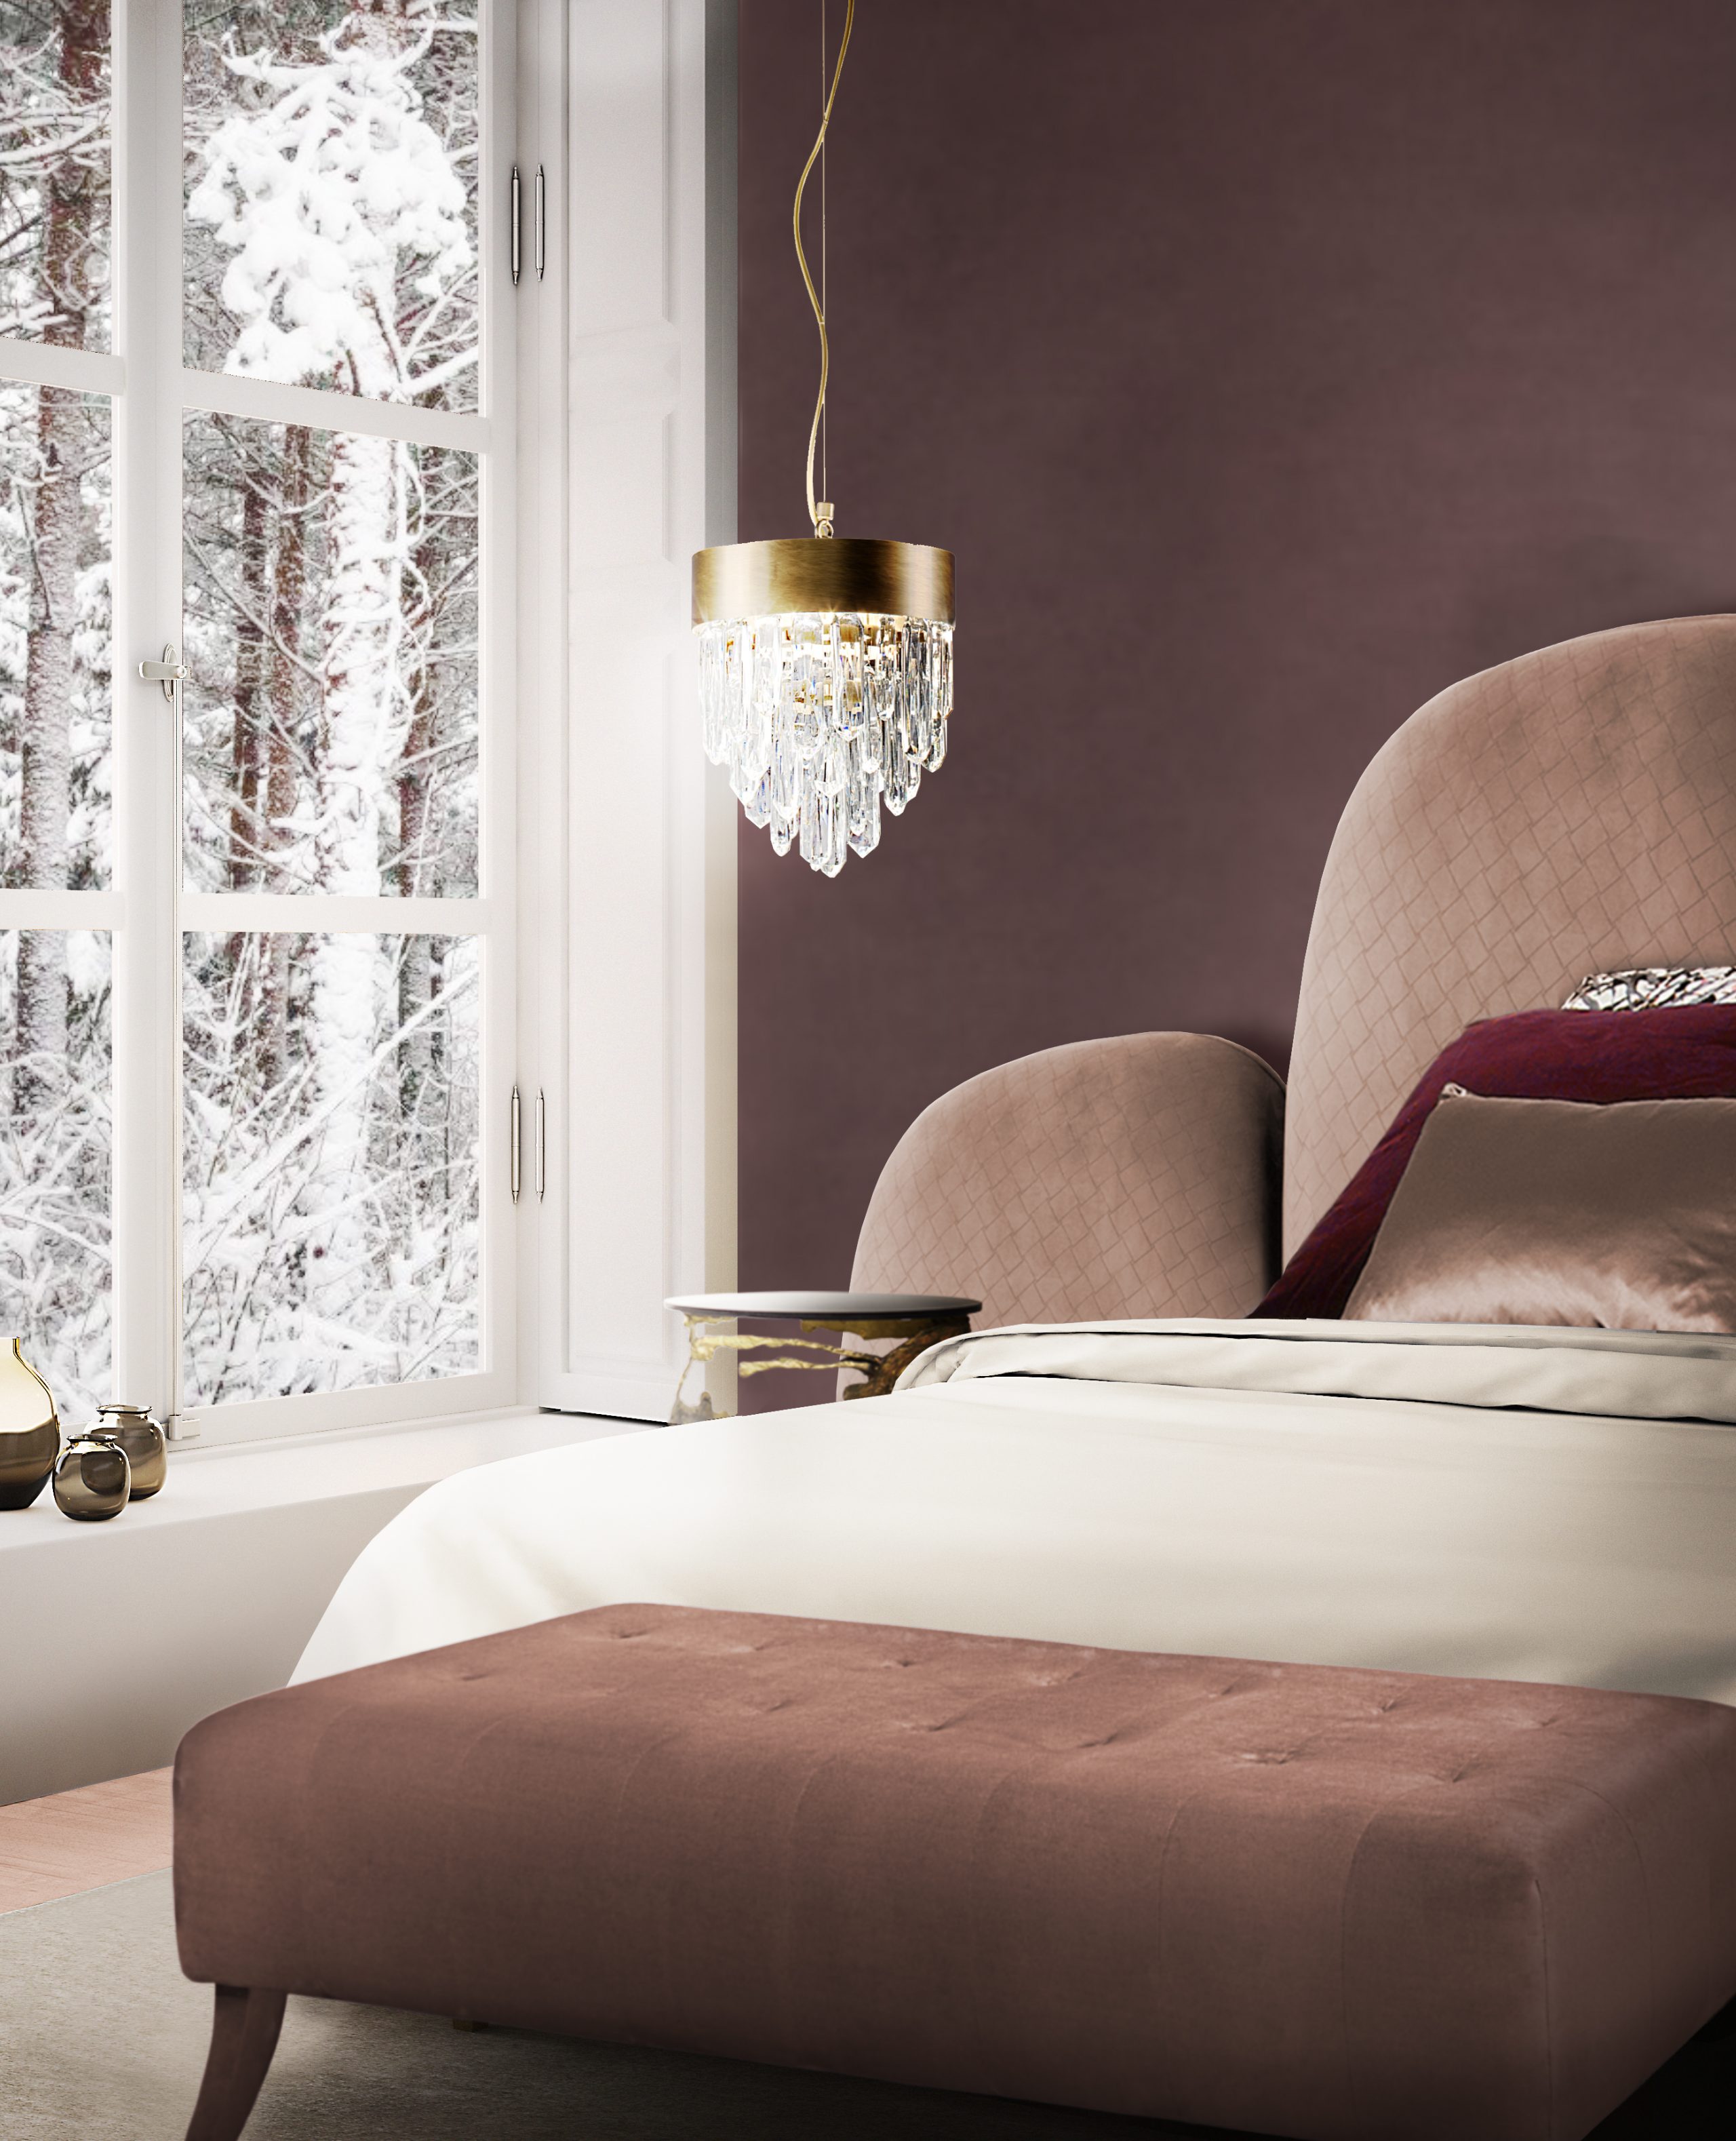 room by room inspirations Enjoy the experience where design collides in a stunning sensory mix